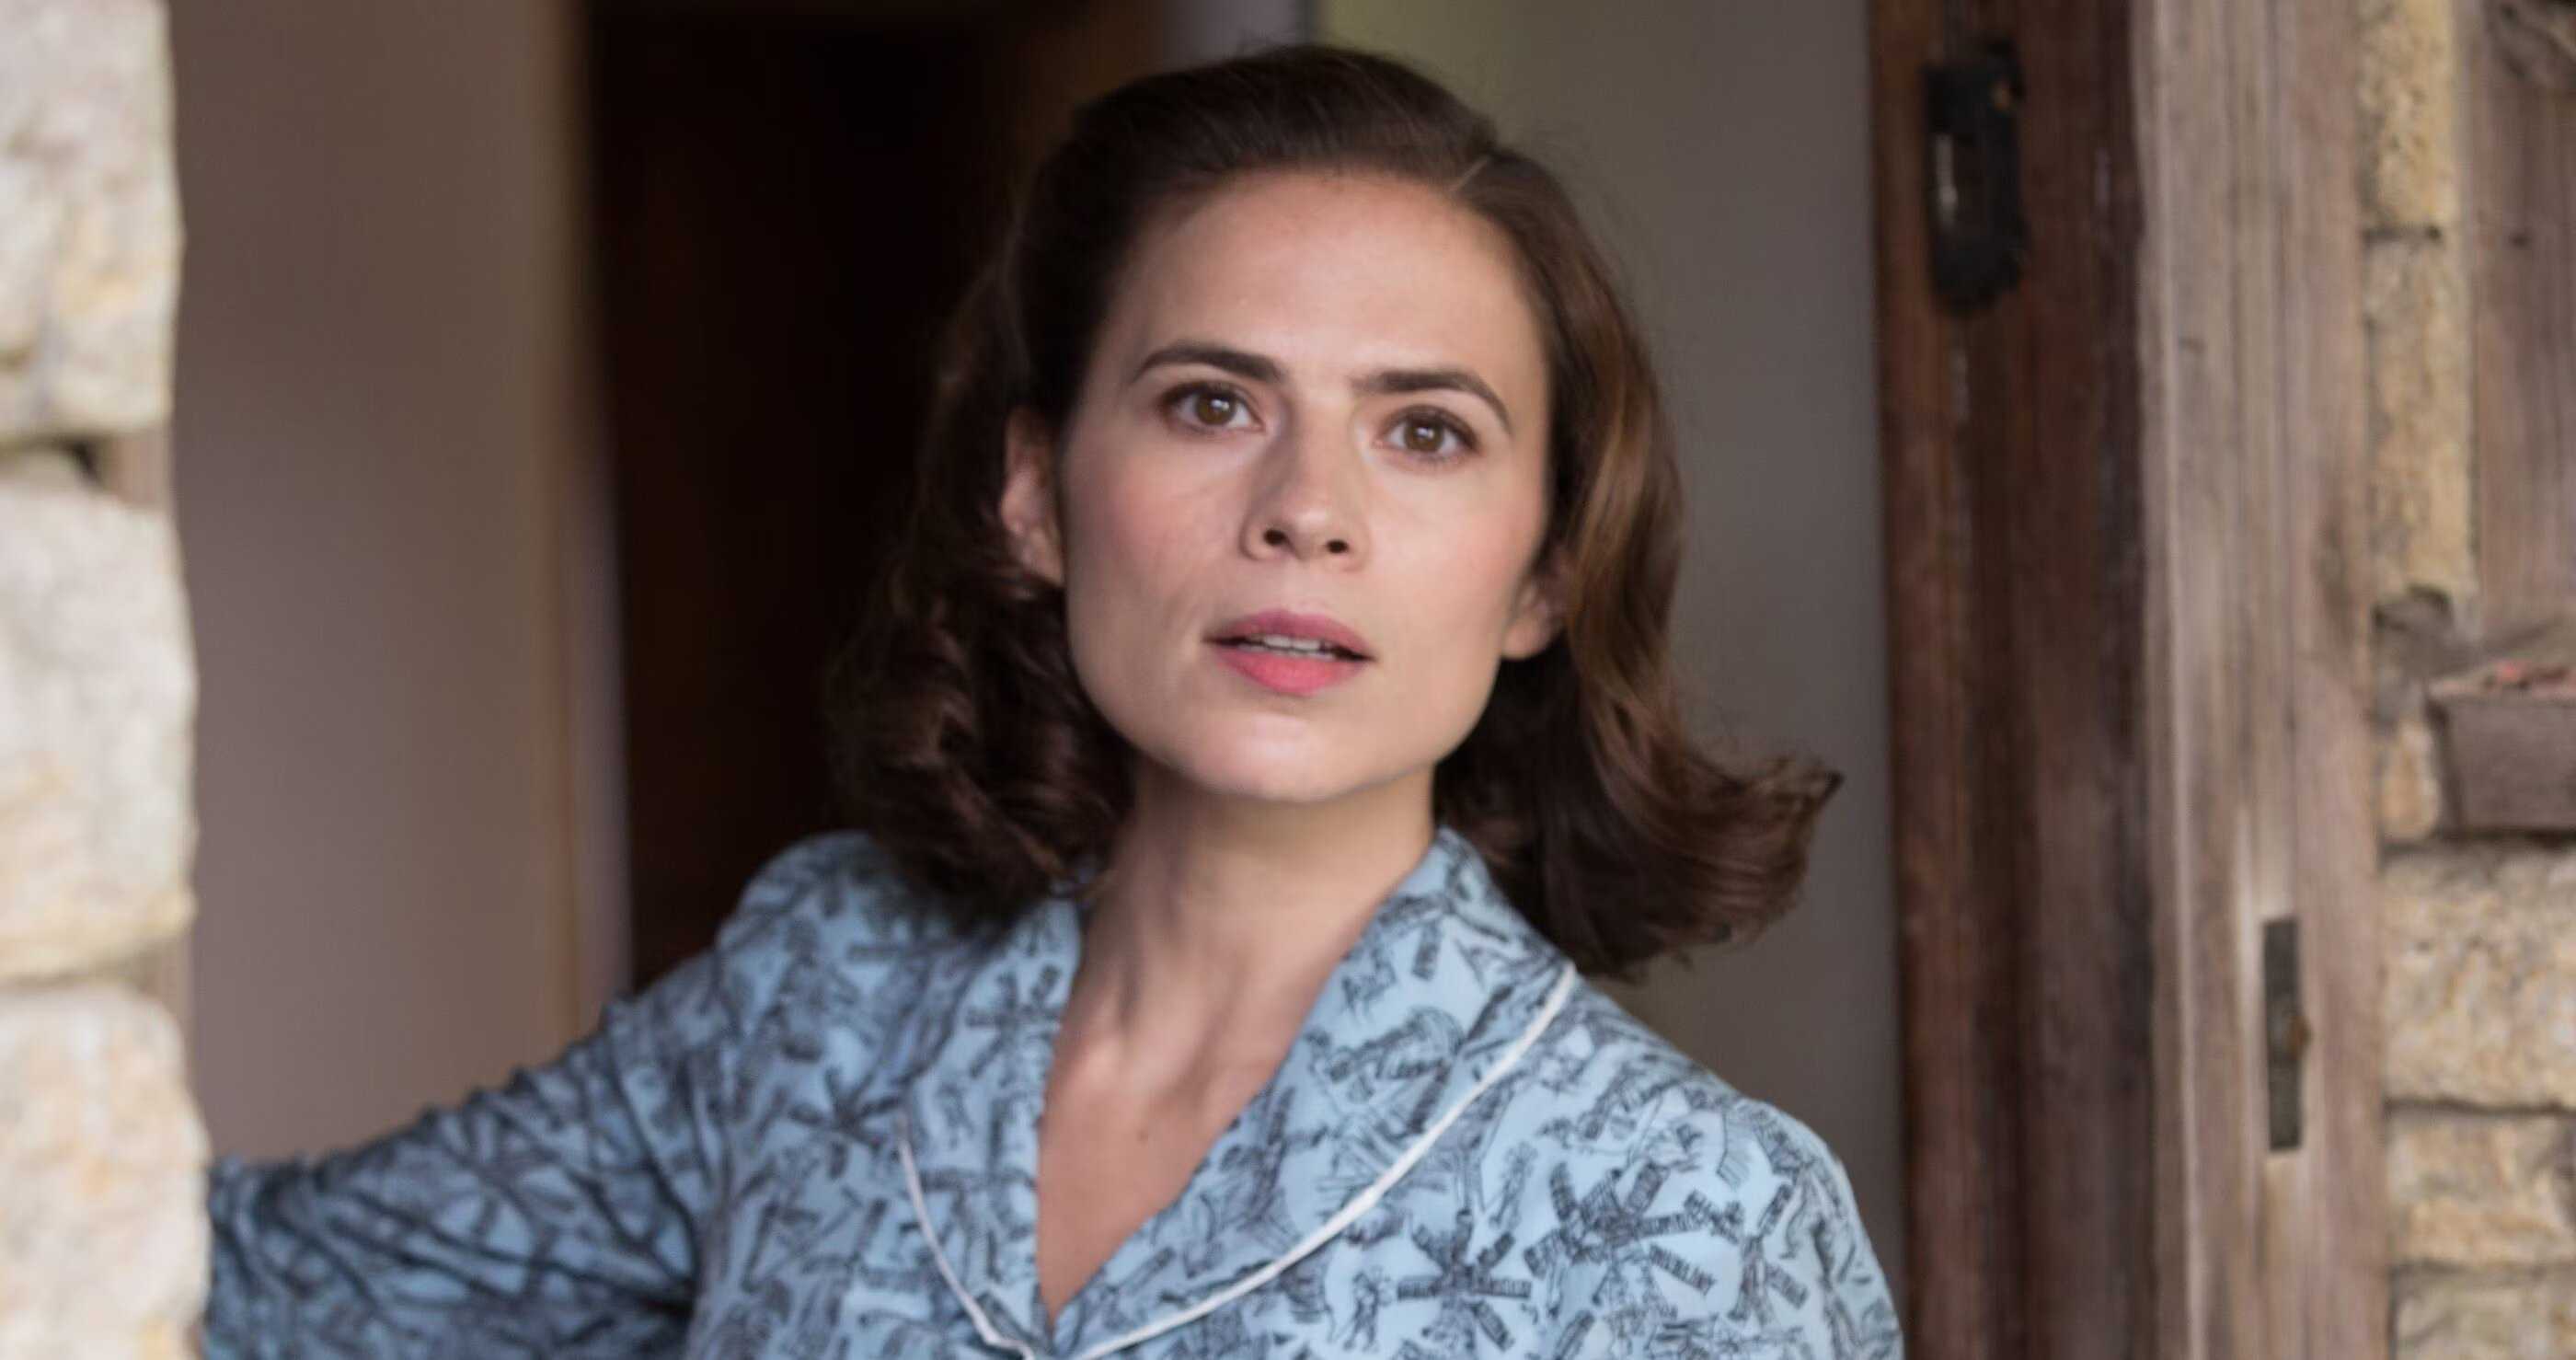 Hayley Atwell balances dual roles: The future of Peggy Carter and Conviction